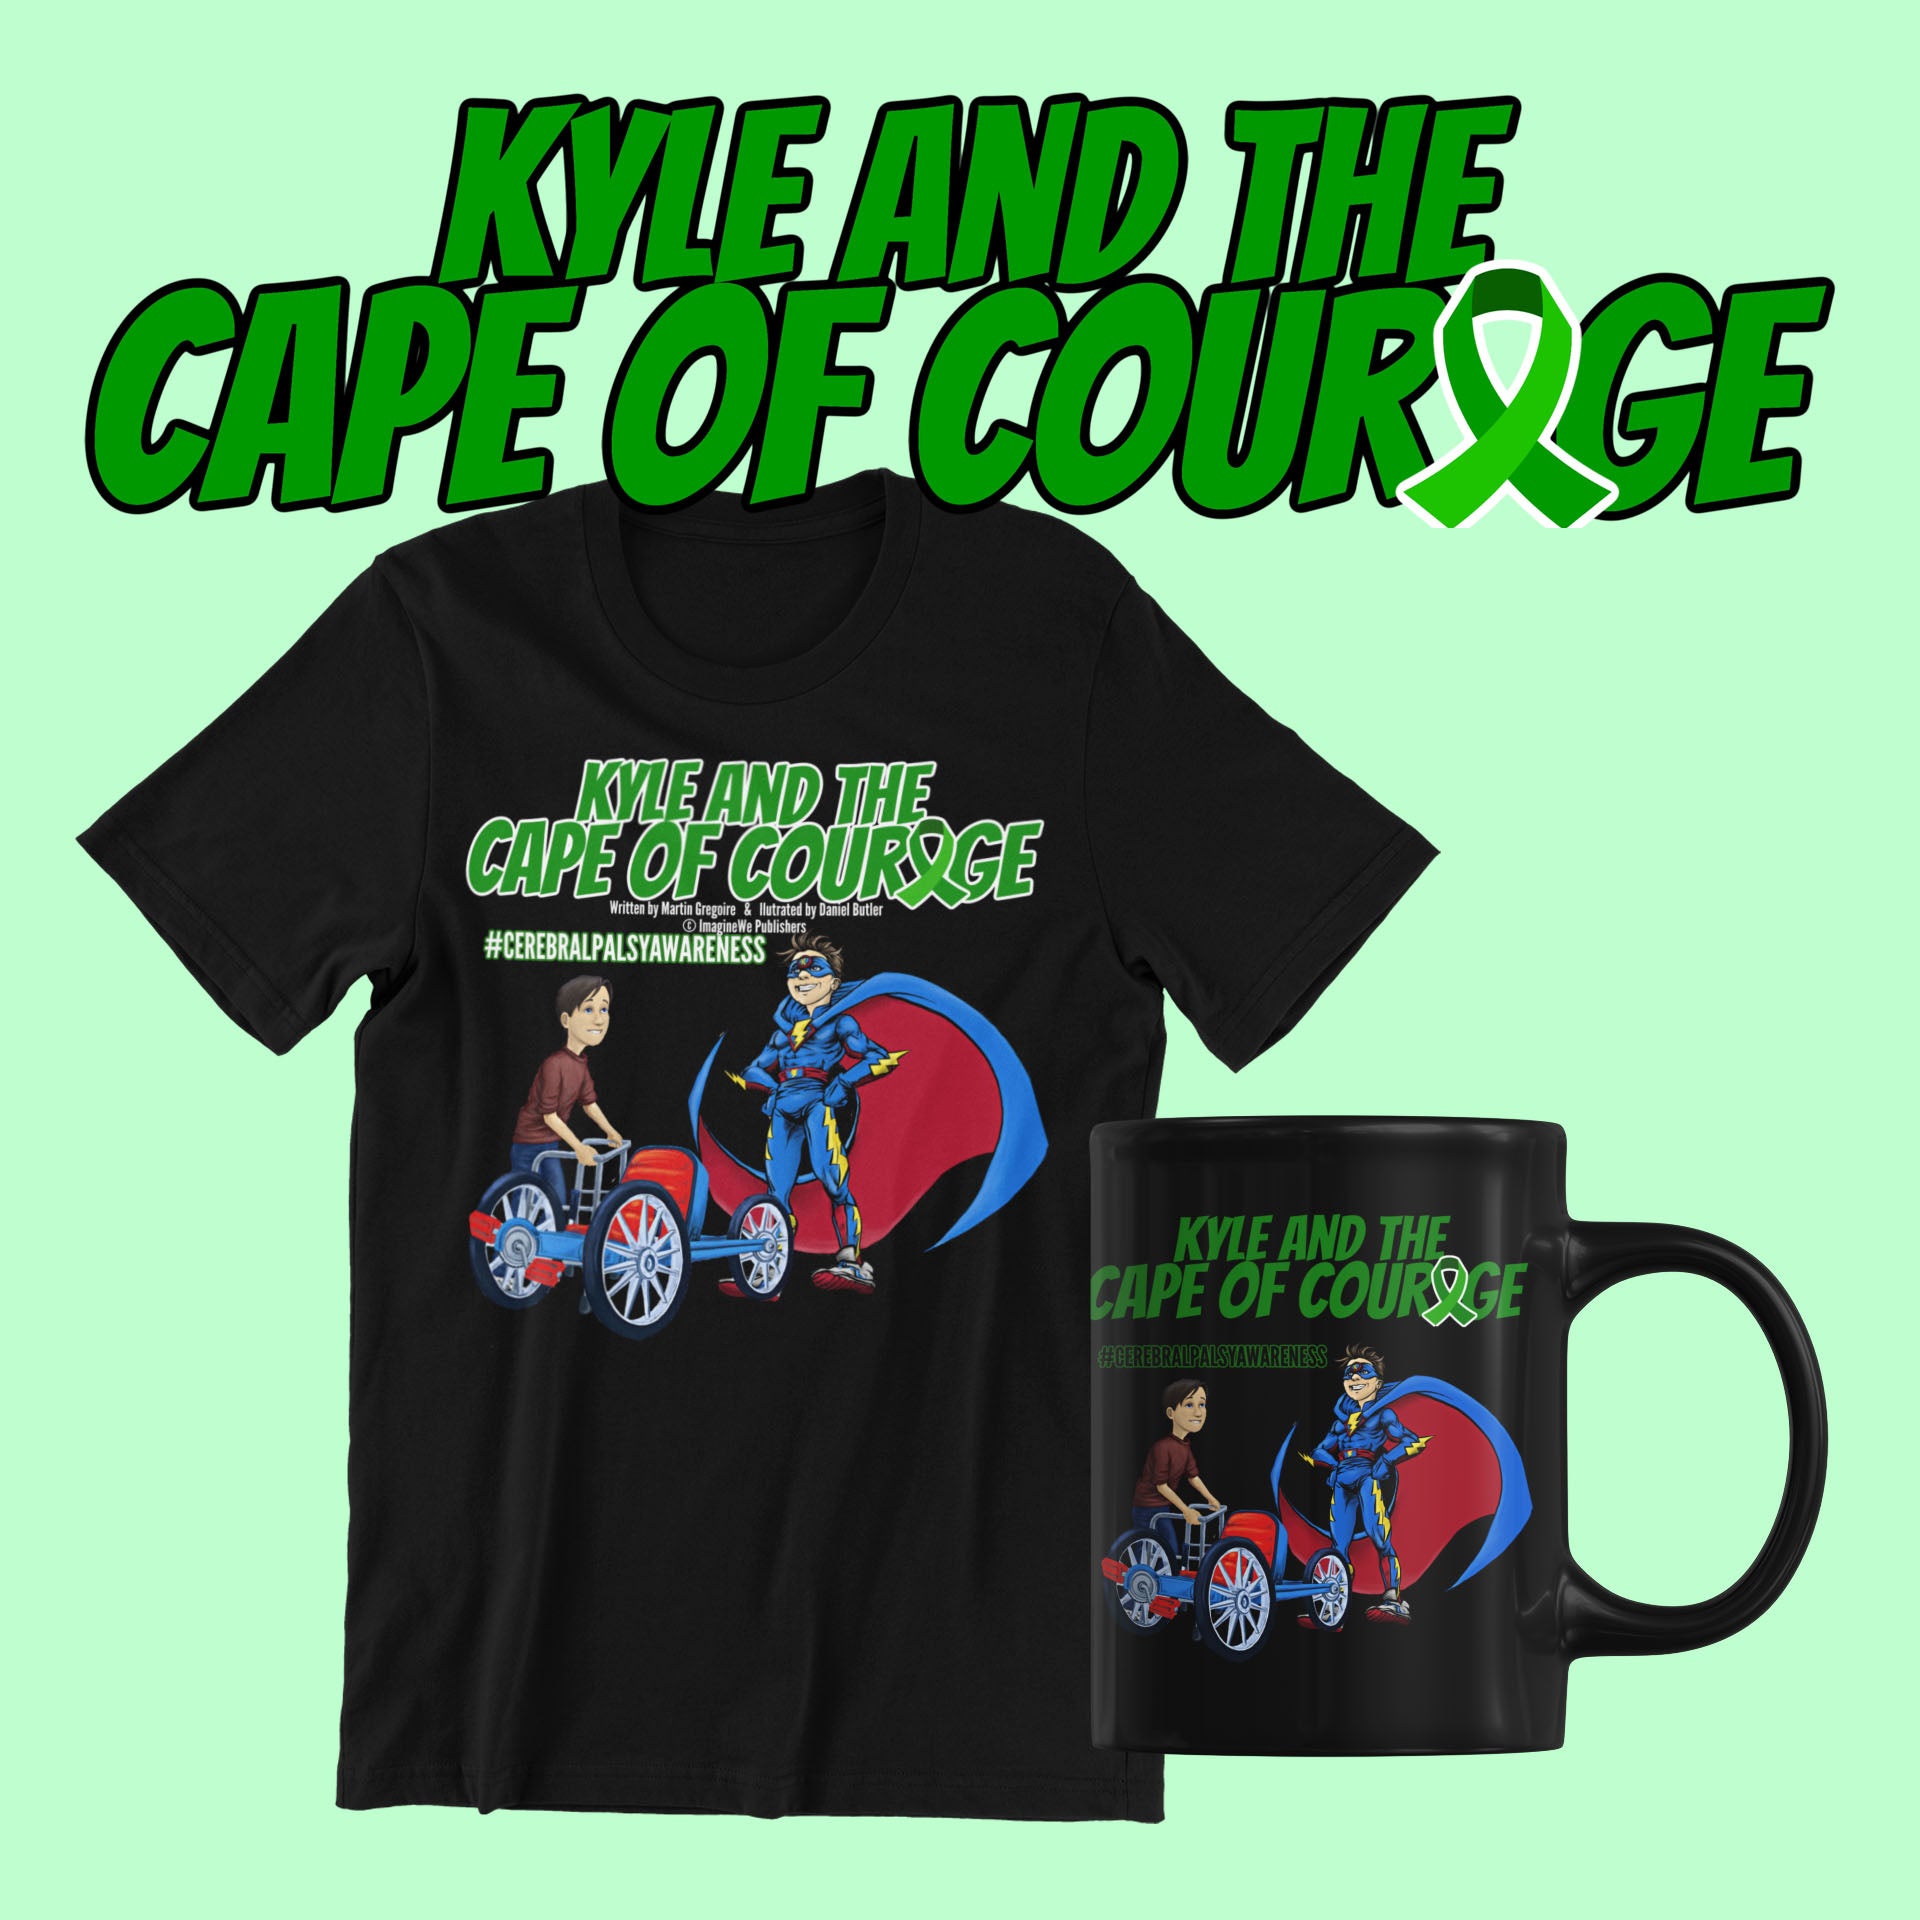 Kyle and the Cape of Courage Merch